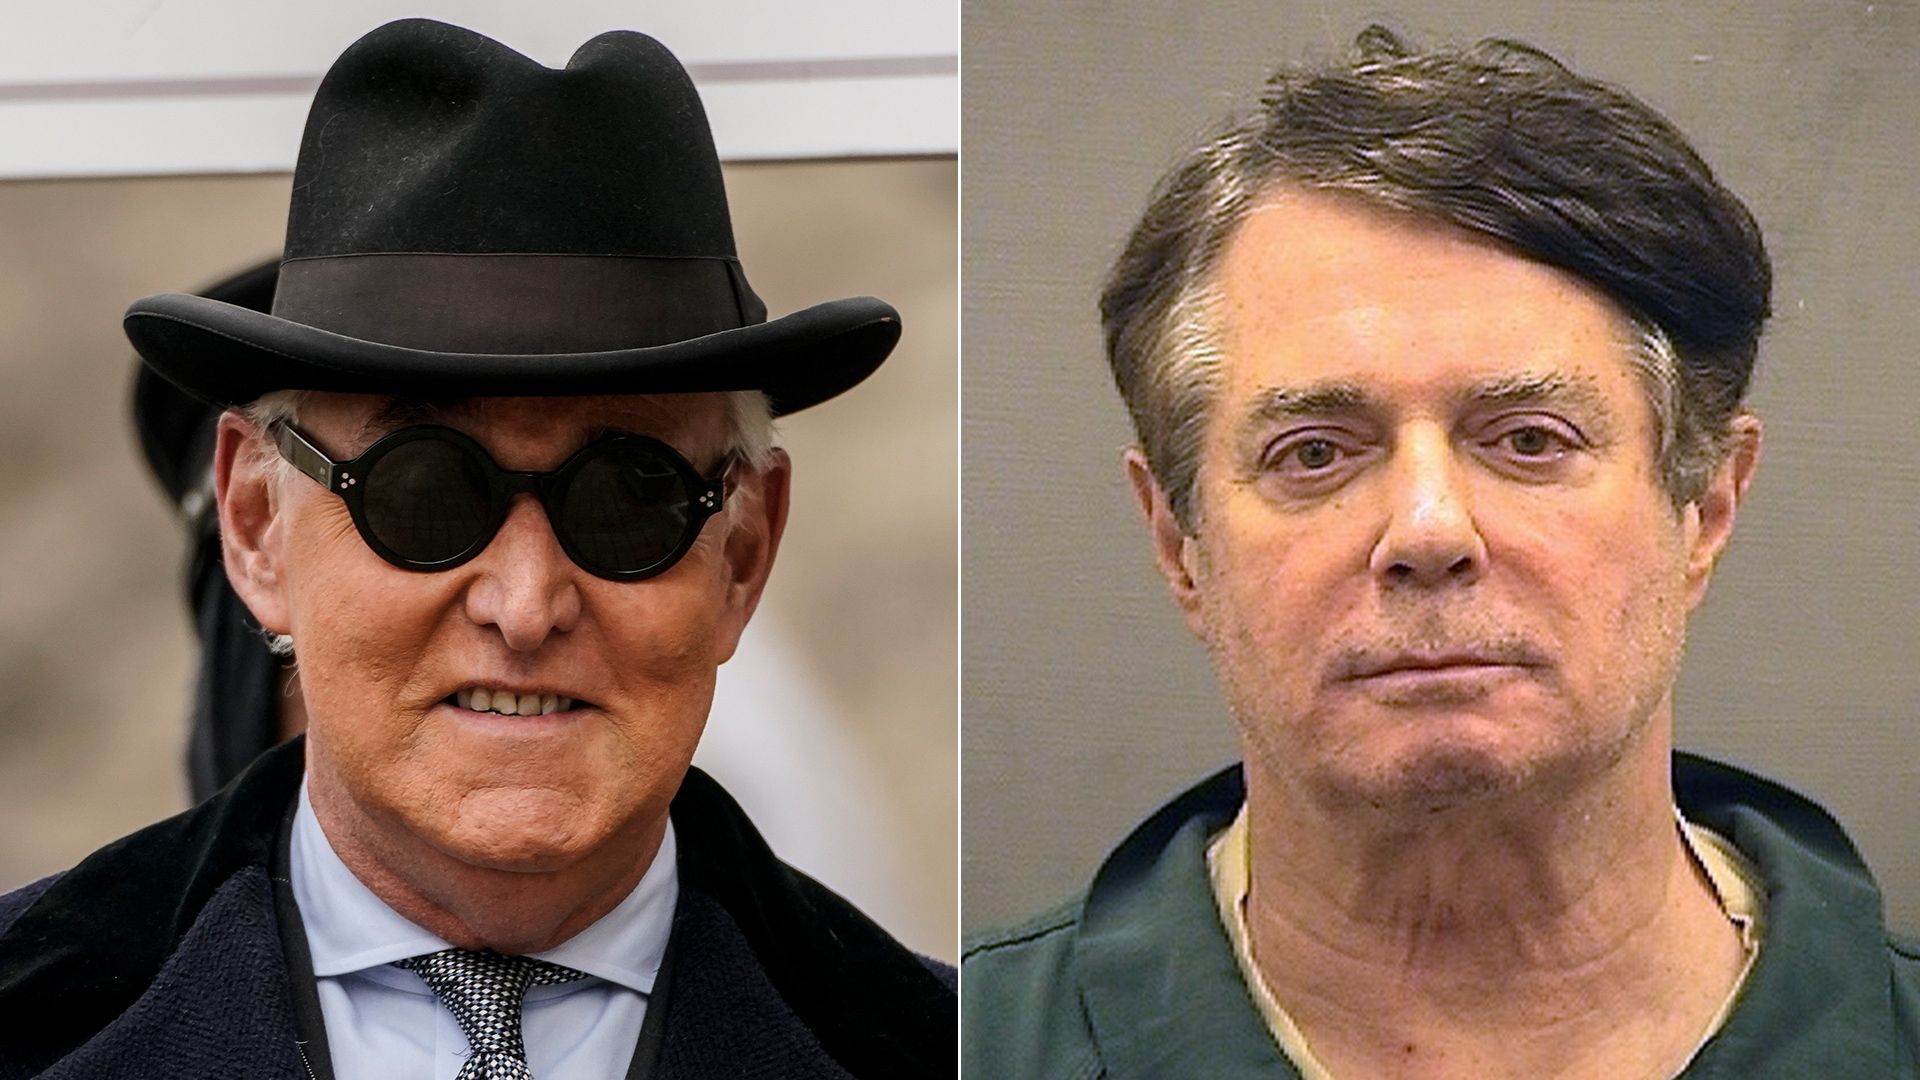 Photos of Roger Stone and Paul Manafort